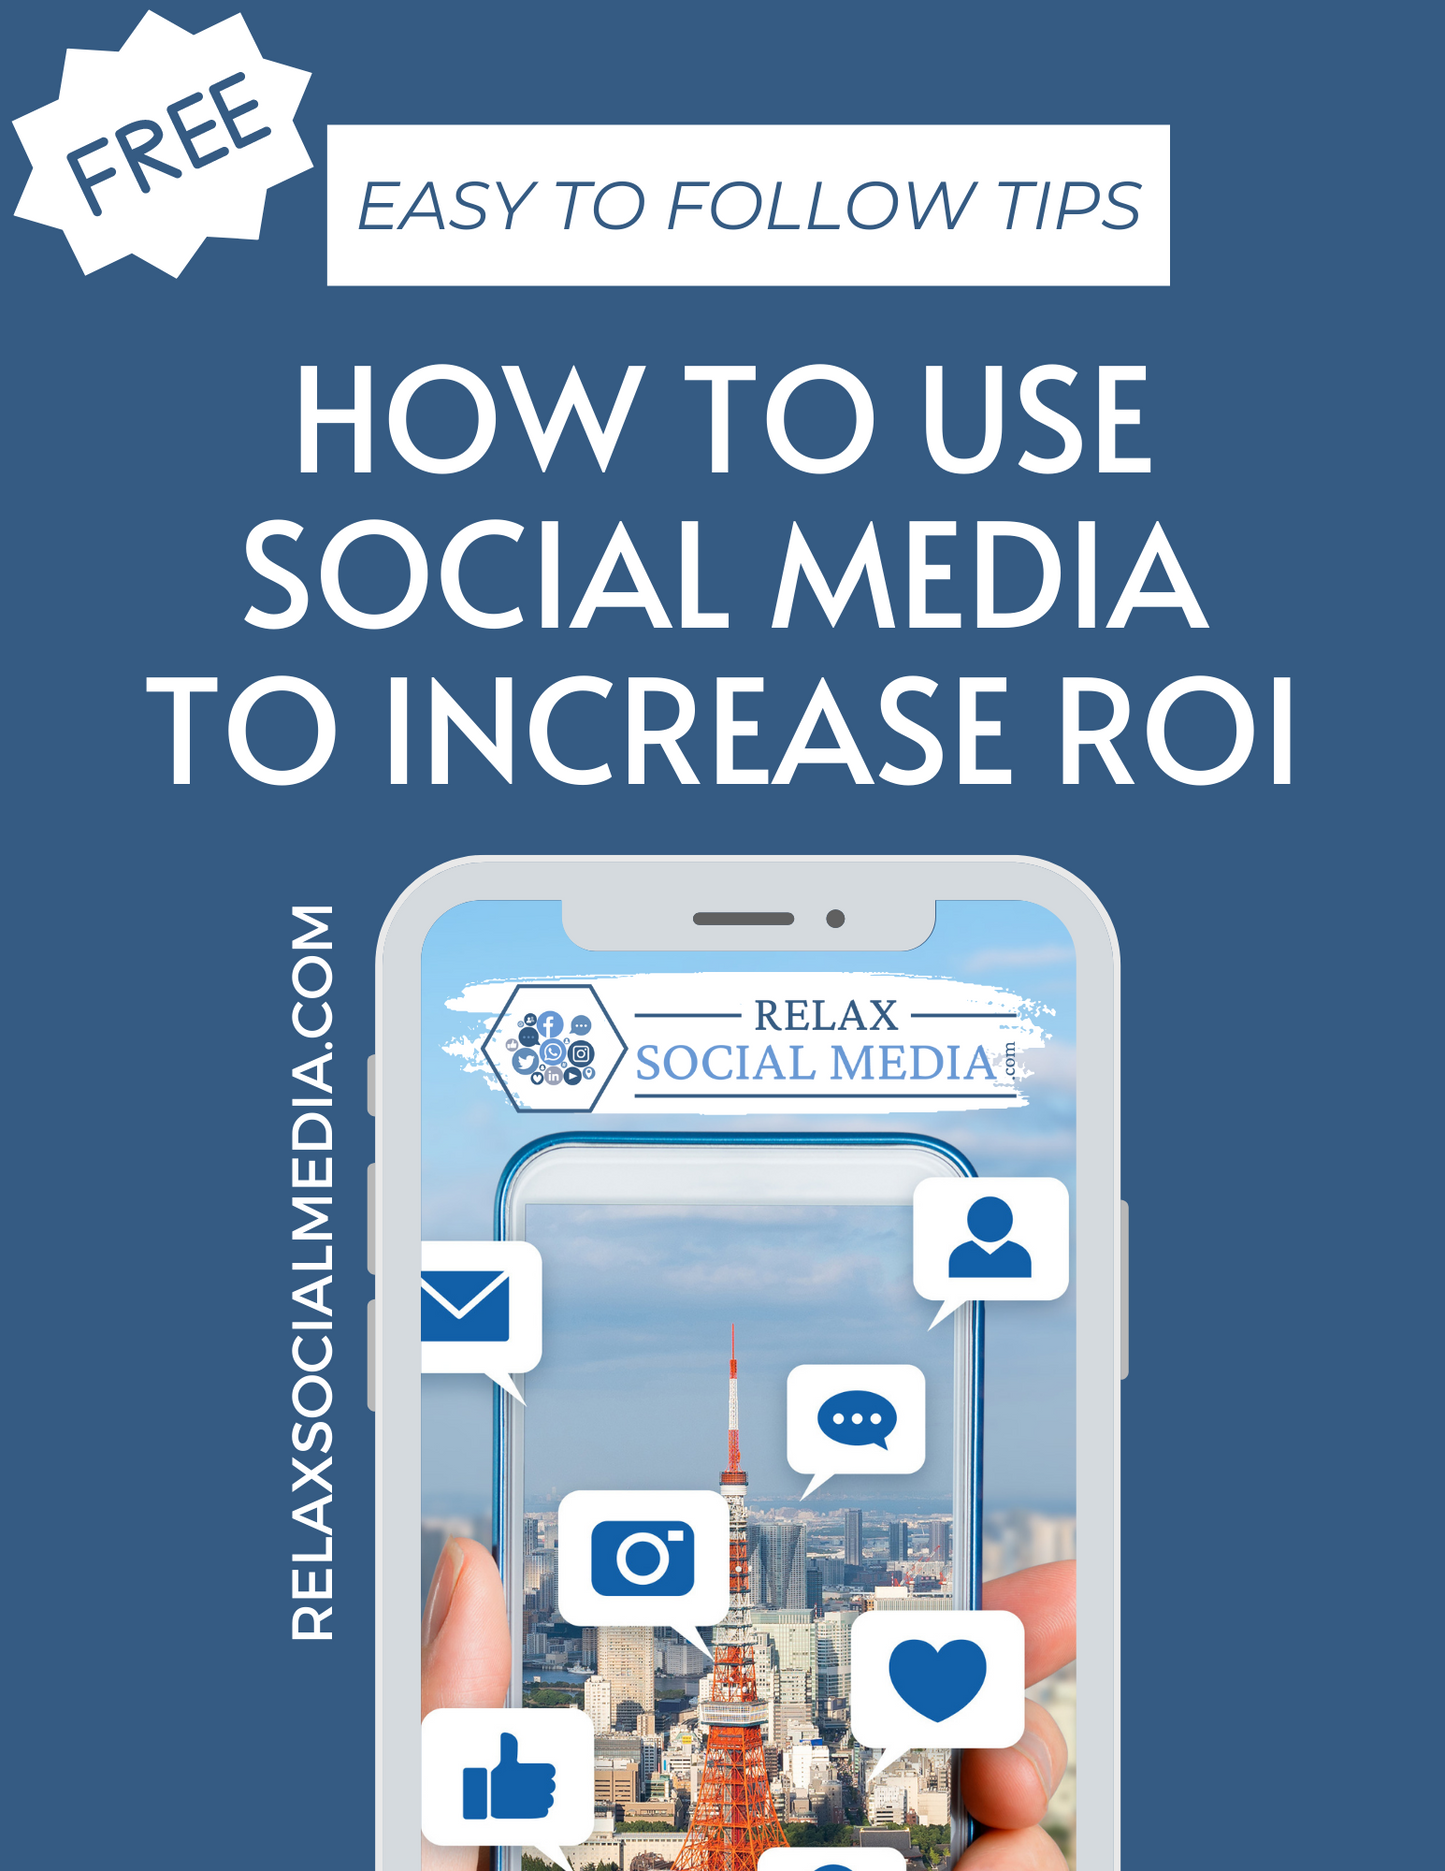 Free Guide on How To Use Social Media To Increase ROI